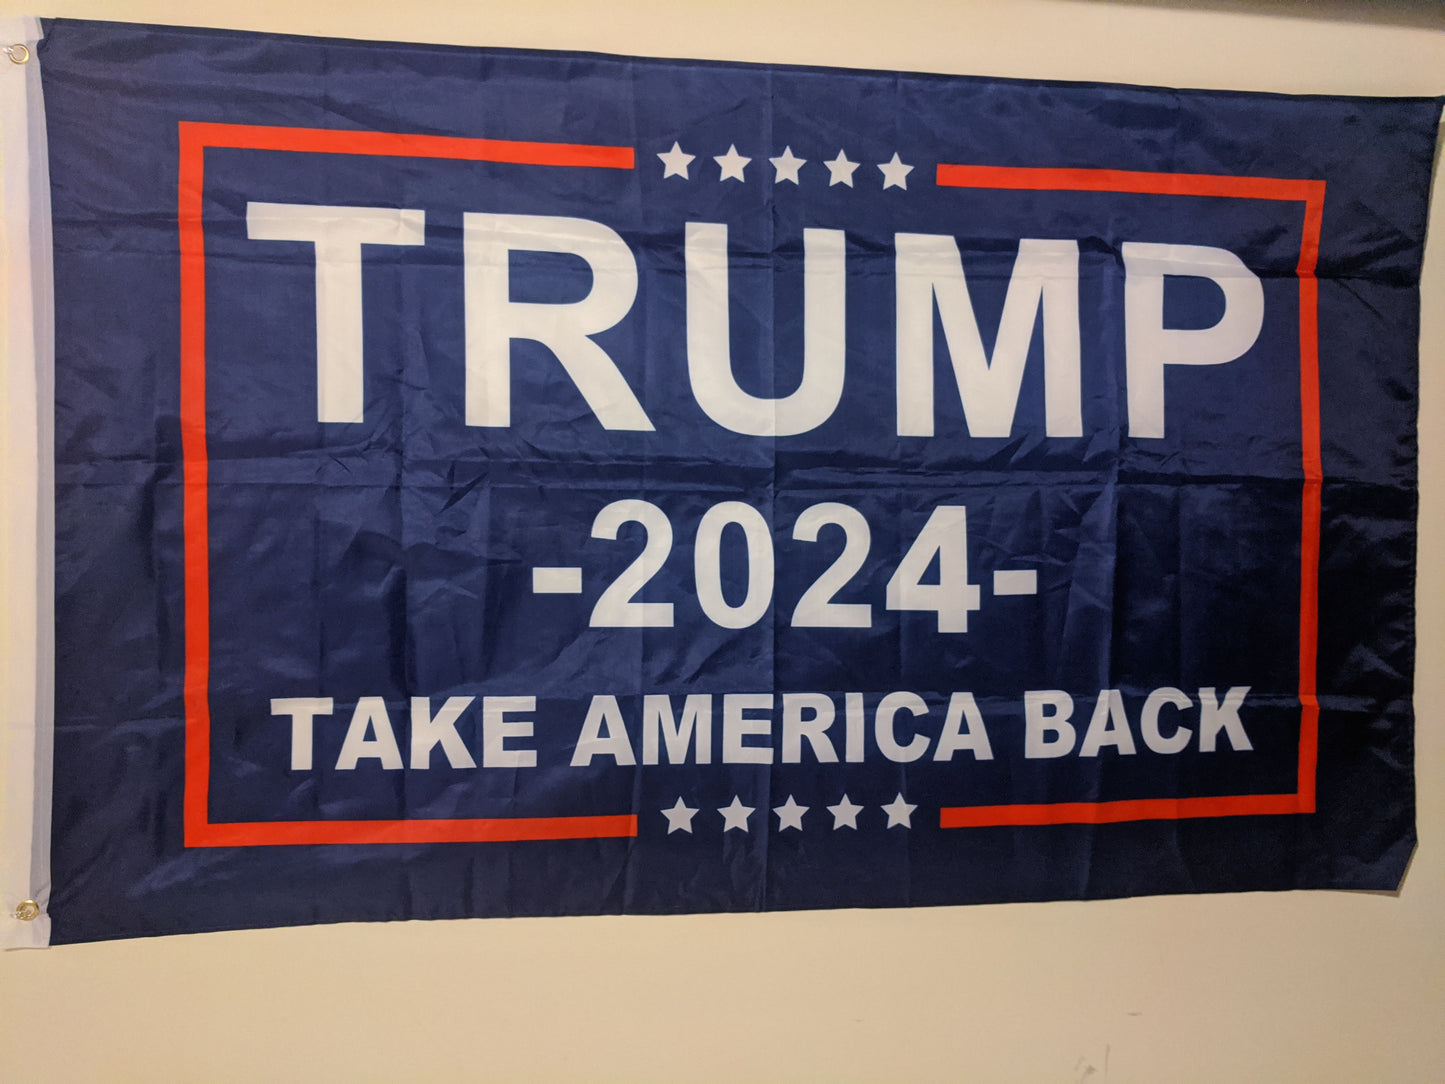 Trump 2024 - Take America Back 3'x5' Flag with Grommets